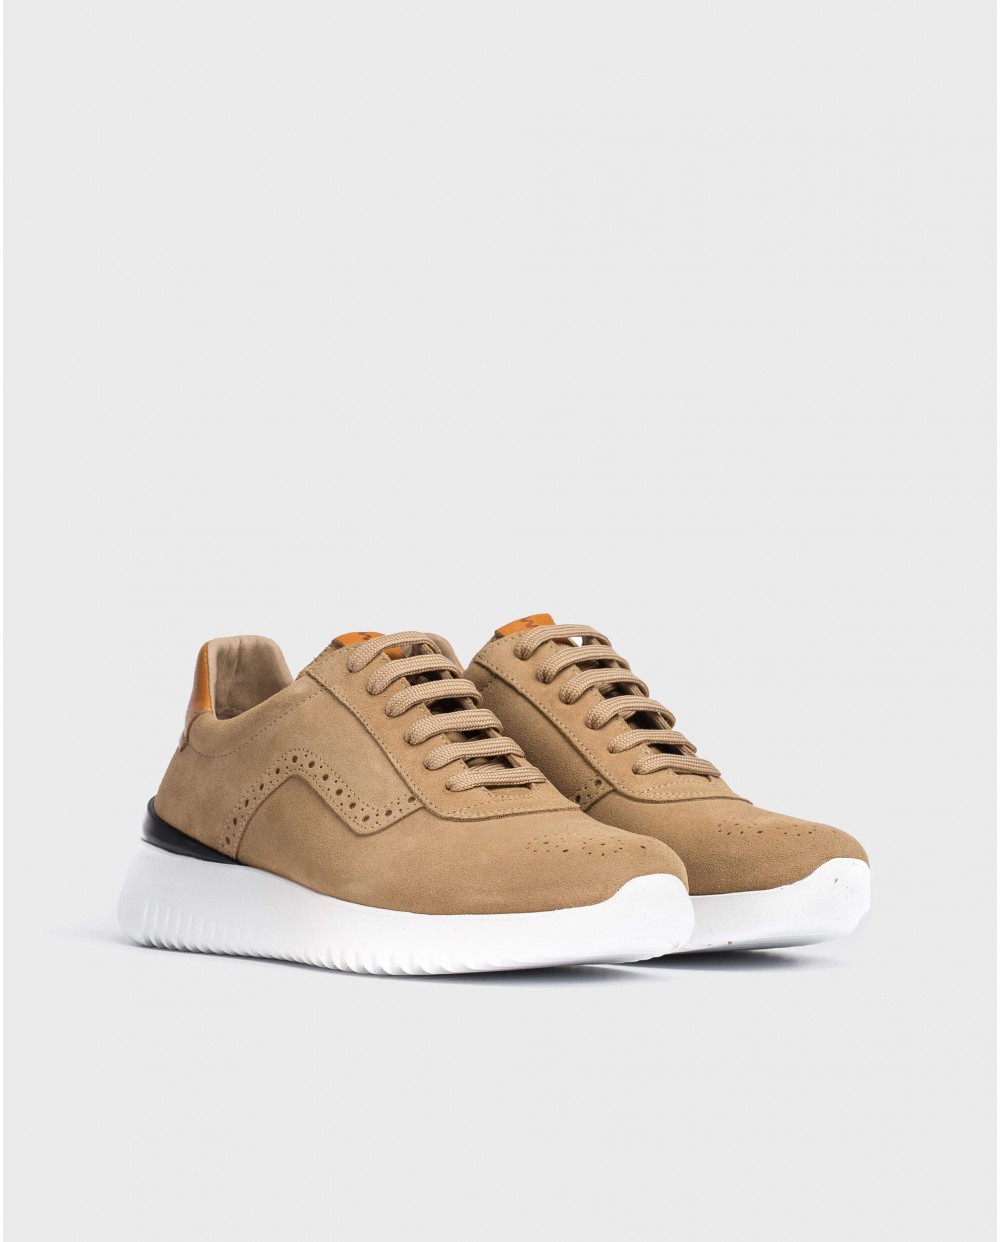 Perforated leather sneaker